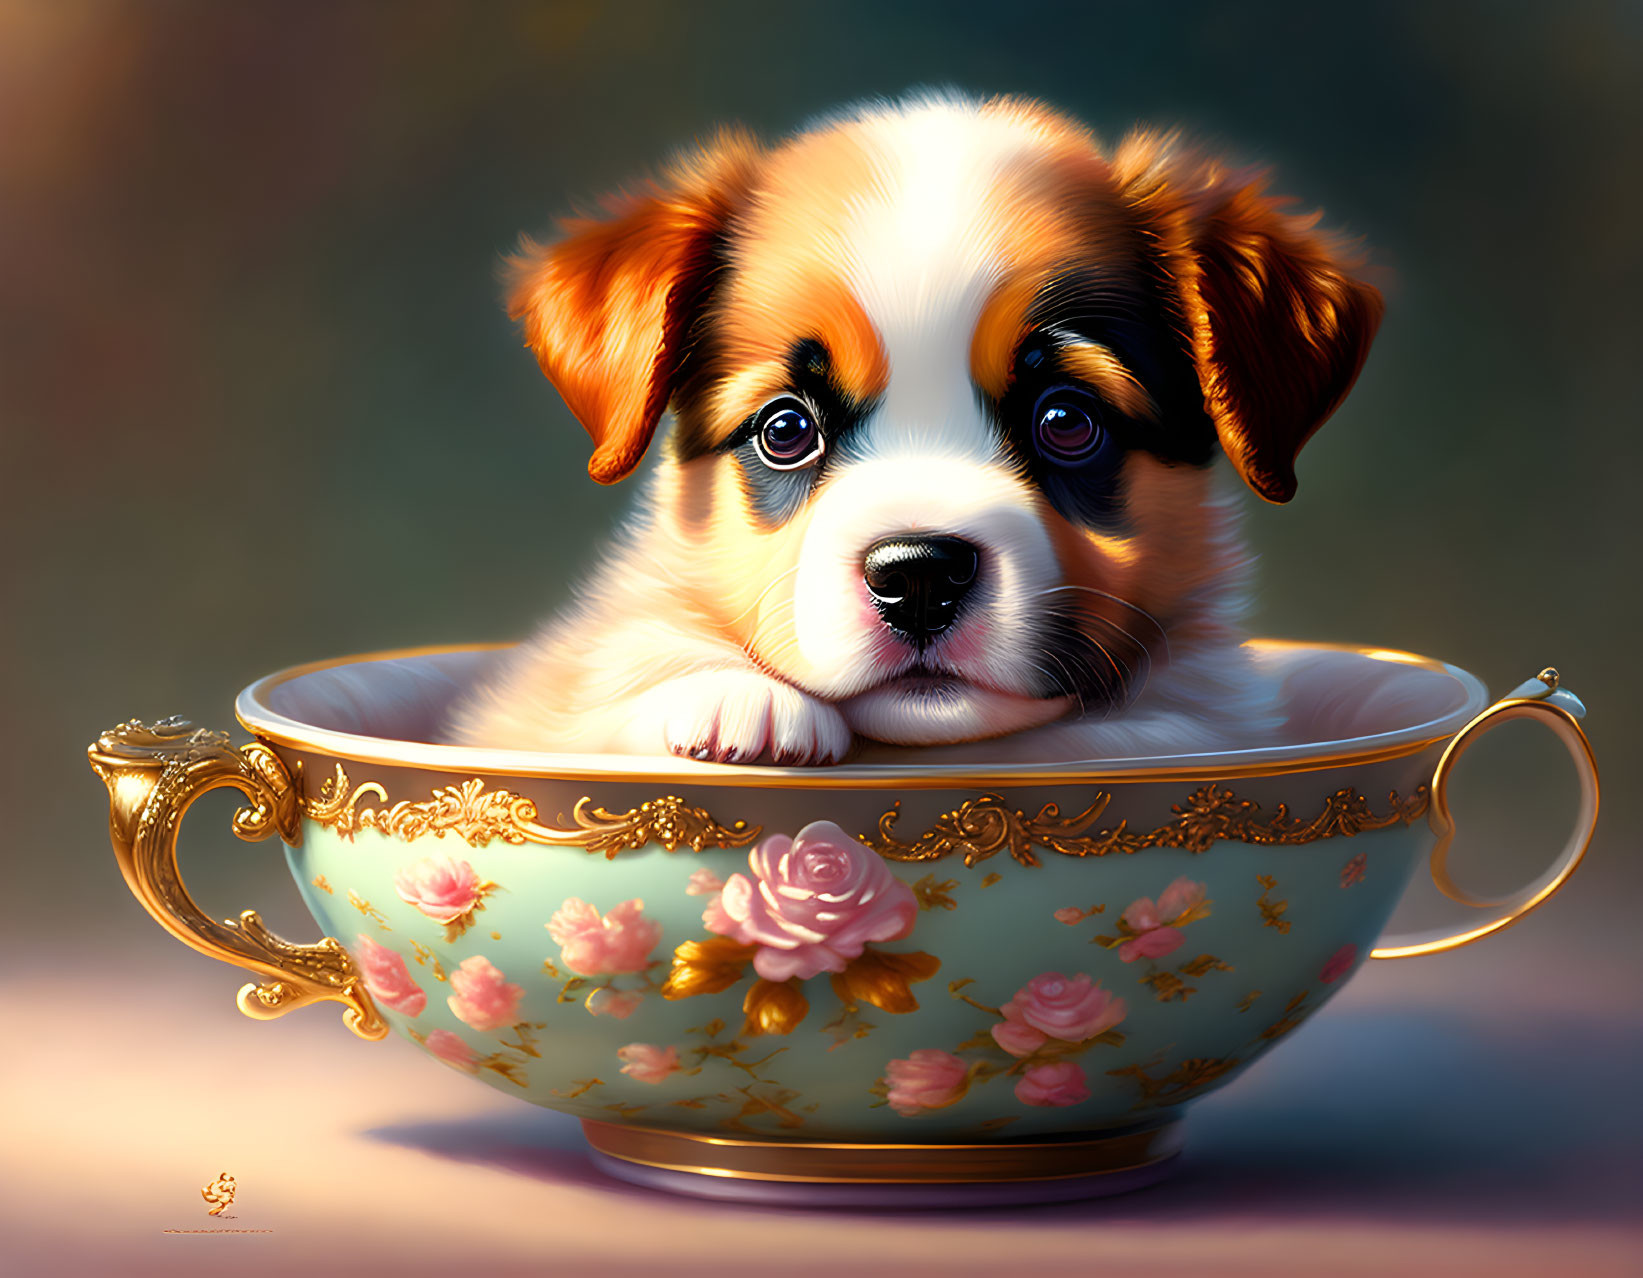 Fluffy black, white, and brown puppy in ornate golden cup